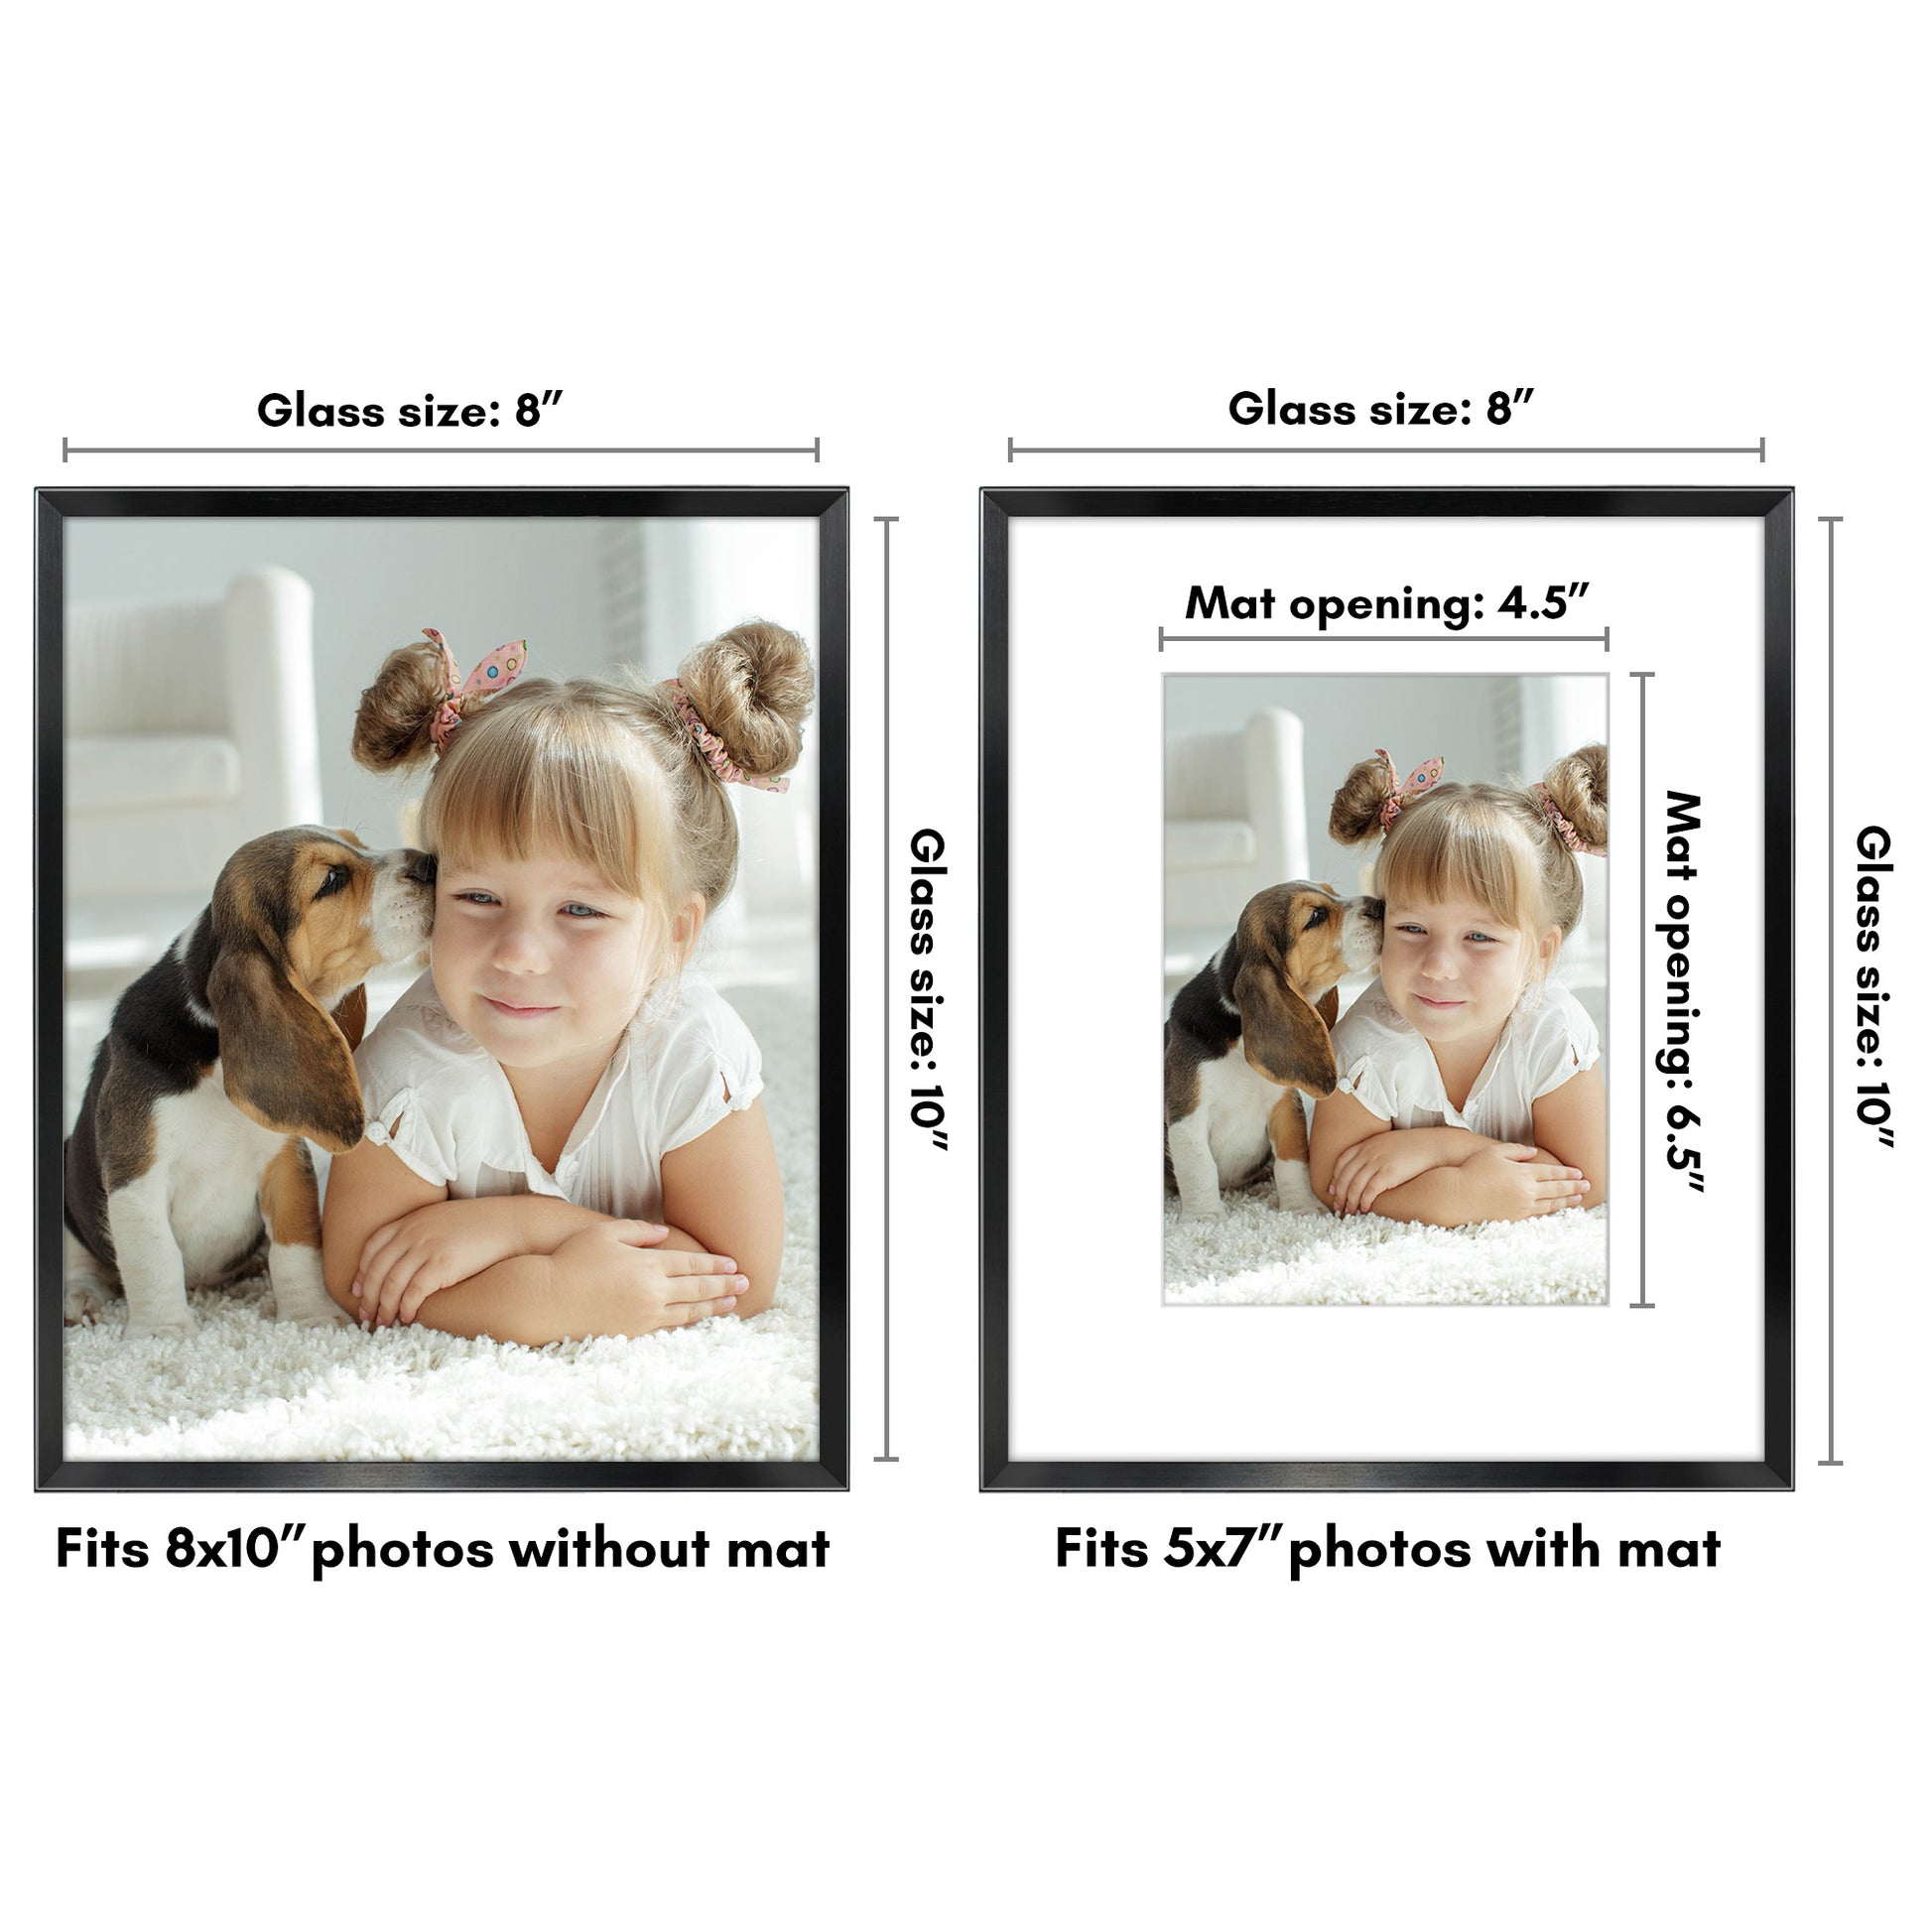 Americanflat Aluminum 8x10 Picture Frame in Black - Use As 5x7 Picture Frame with Mat or 8x10 Frame Without Mat - Shatter Resistant Glass, Built-In